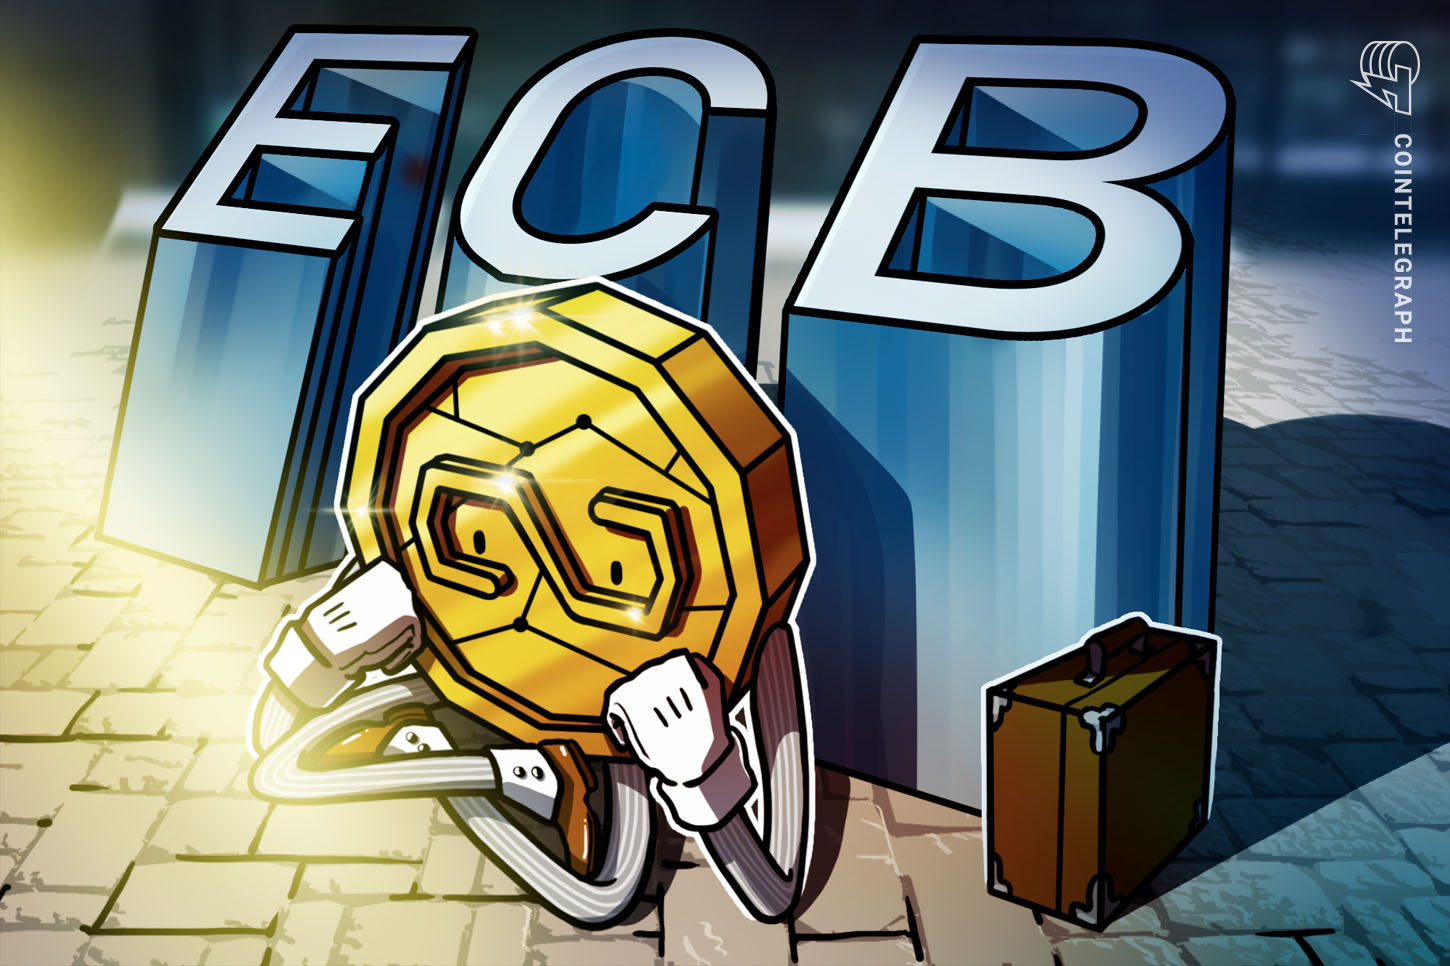 European Central Financial institution Requires Proactive Stablecoin Regulation